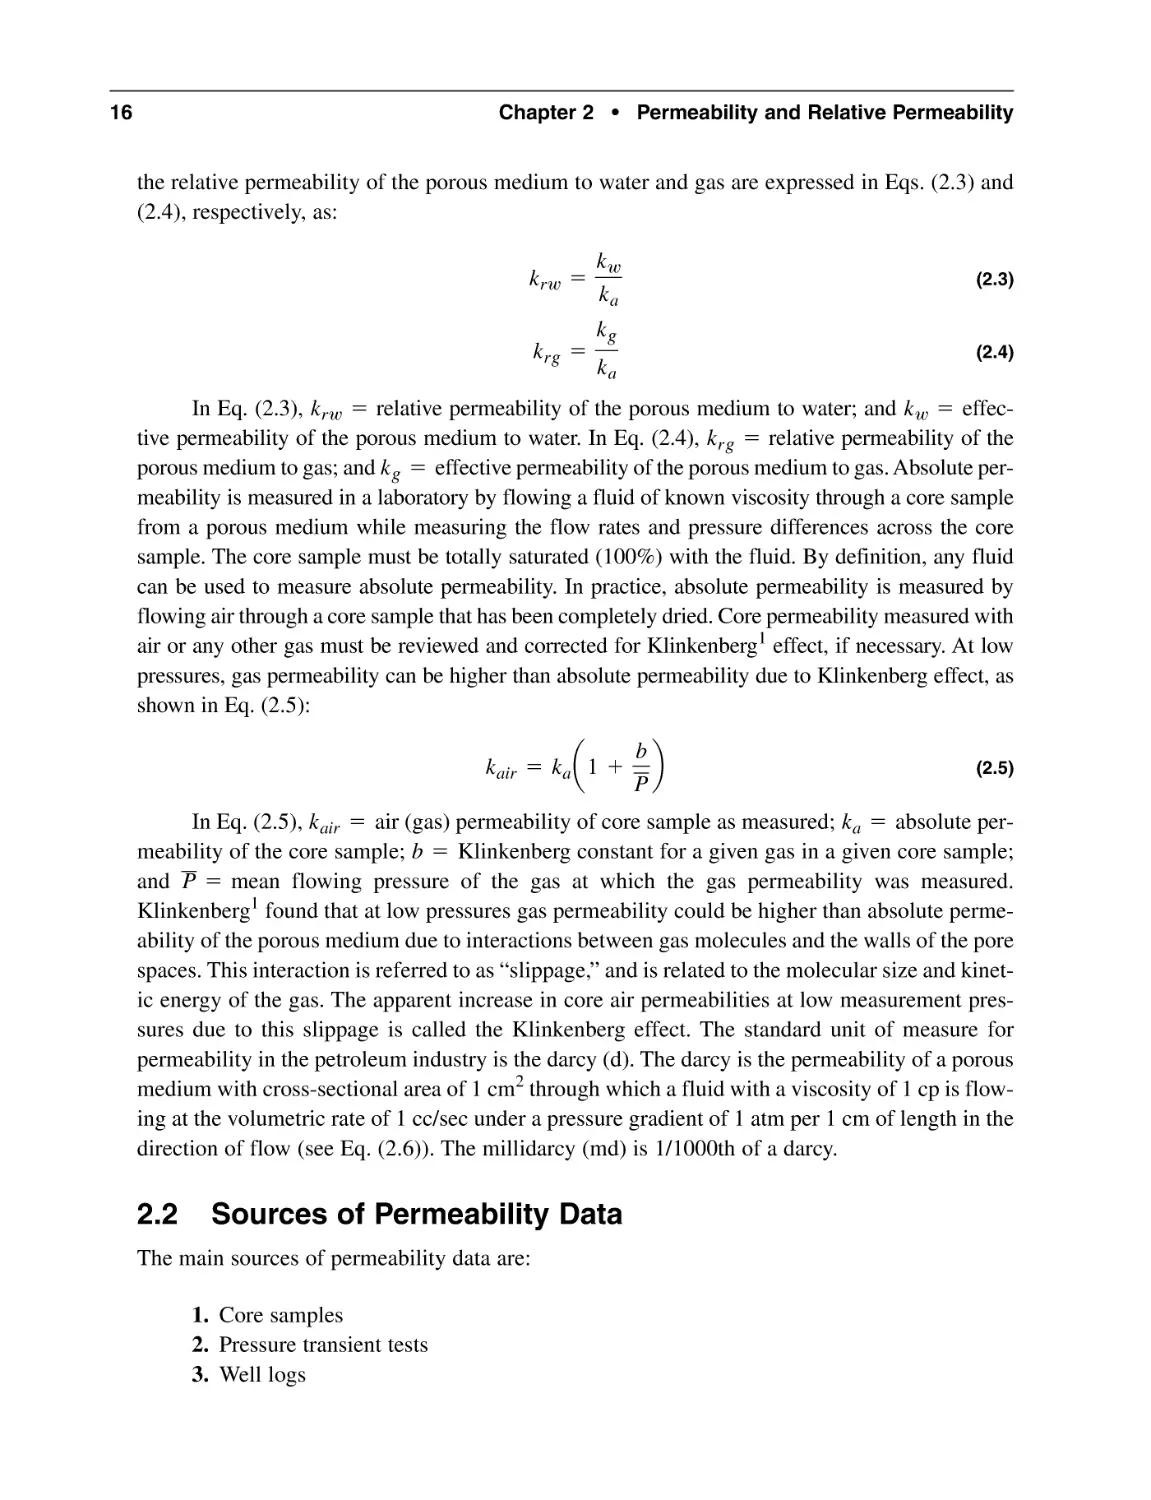 2.2 Sources of Permeability Data